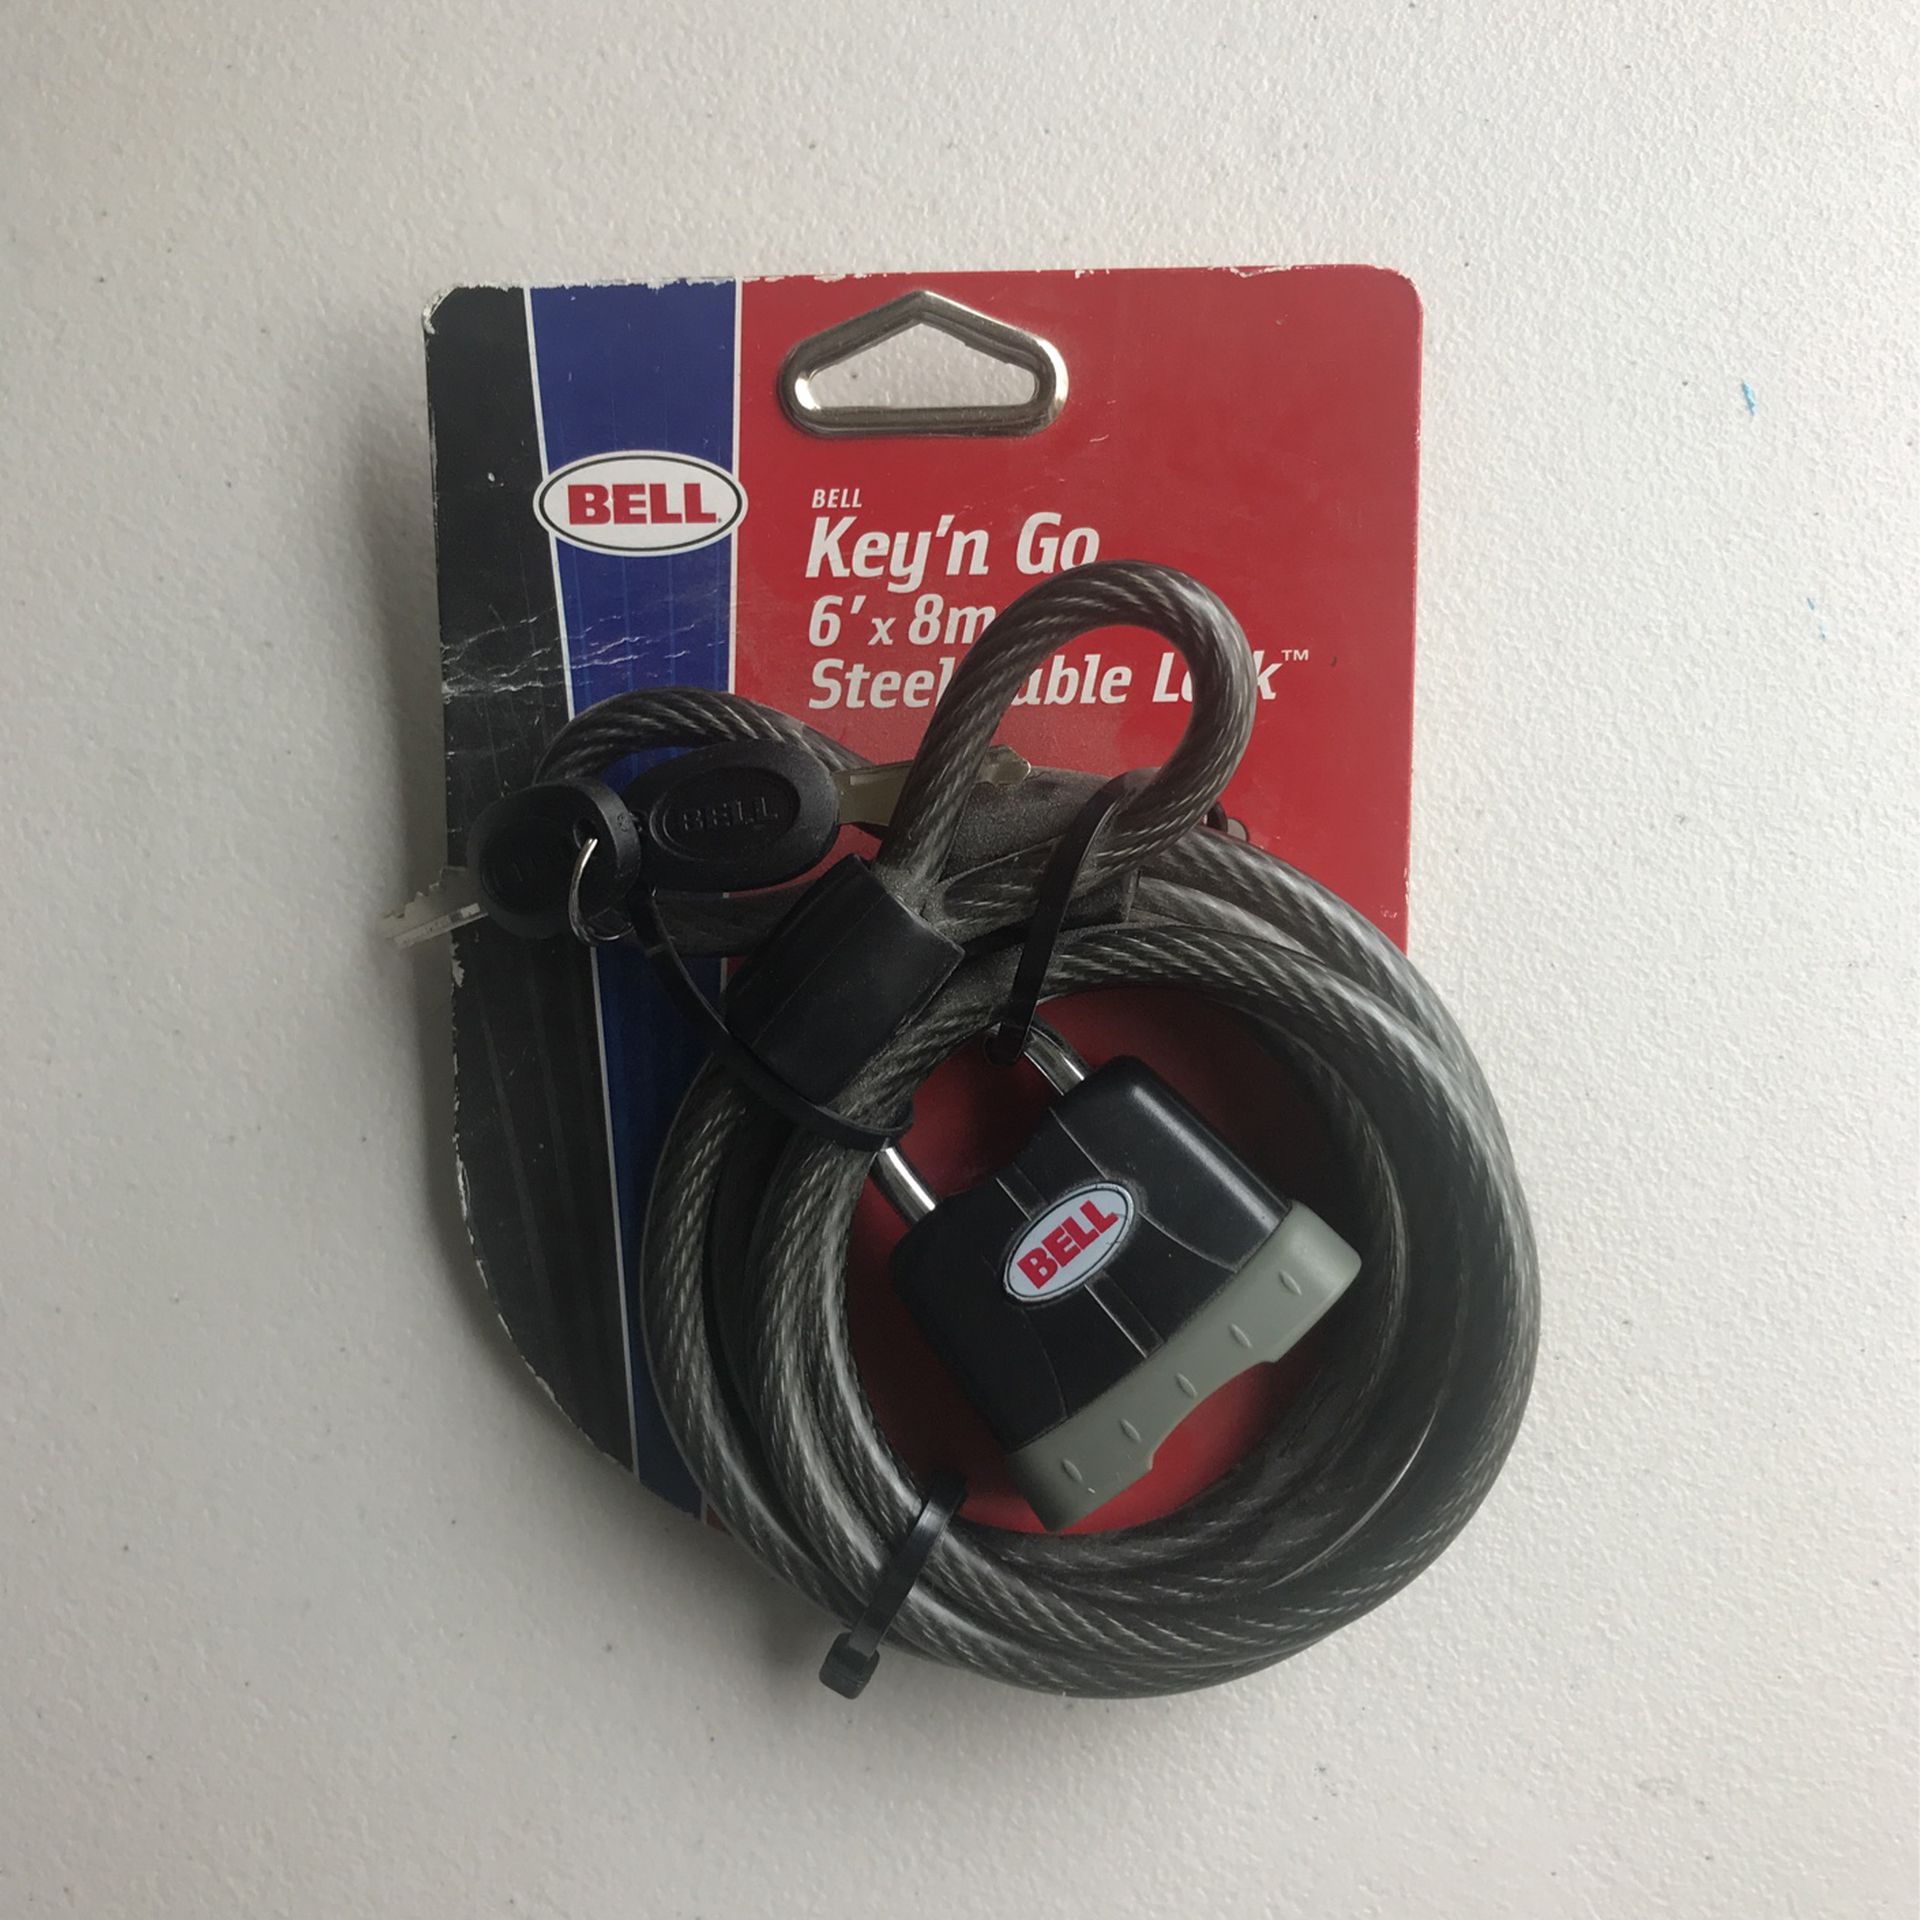 New Bell Steel Cable Bike Lock With Keys